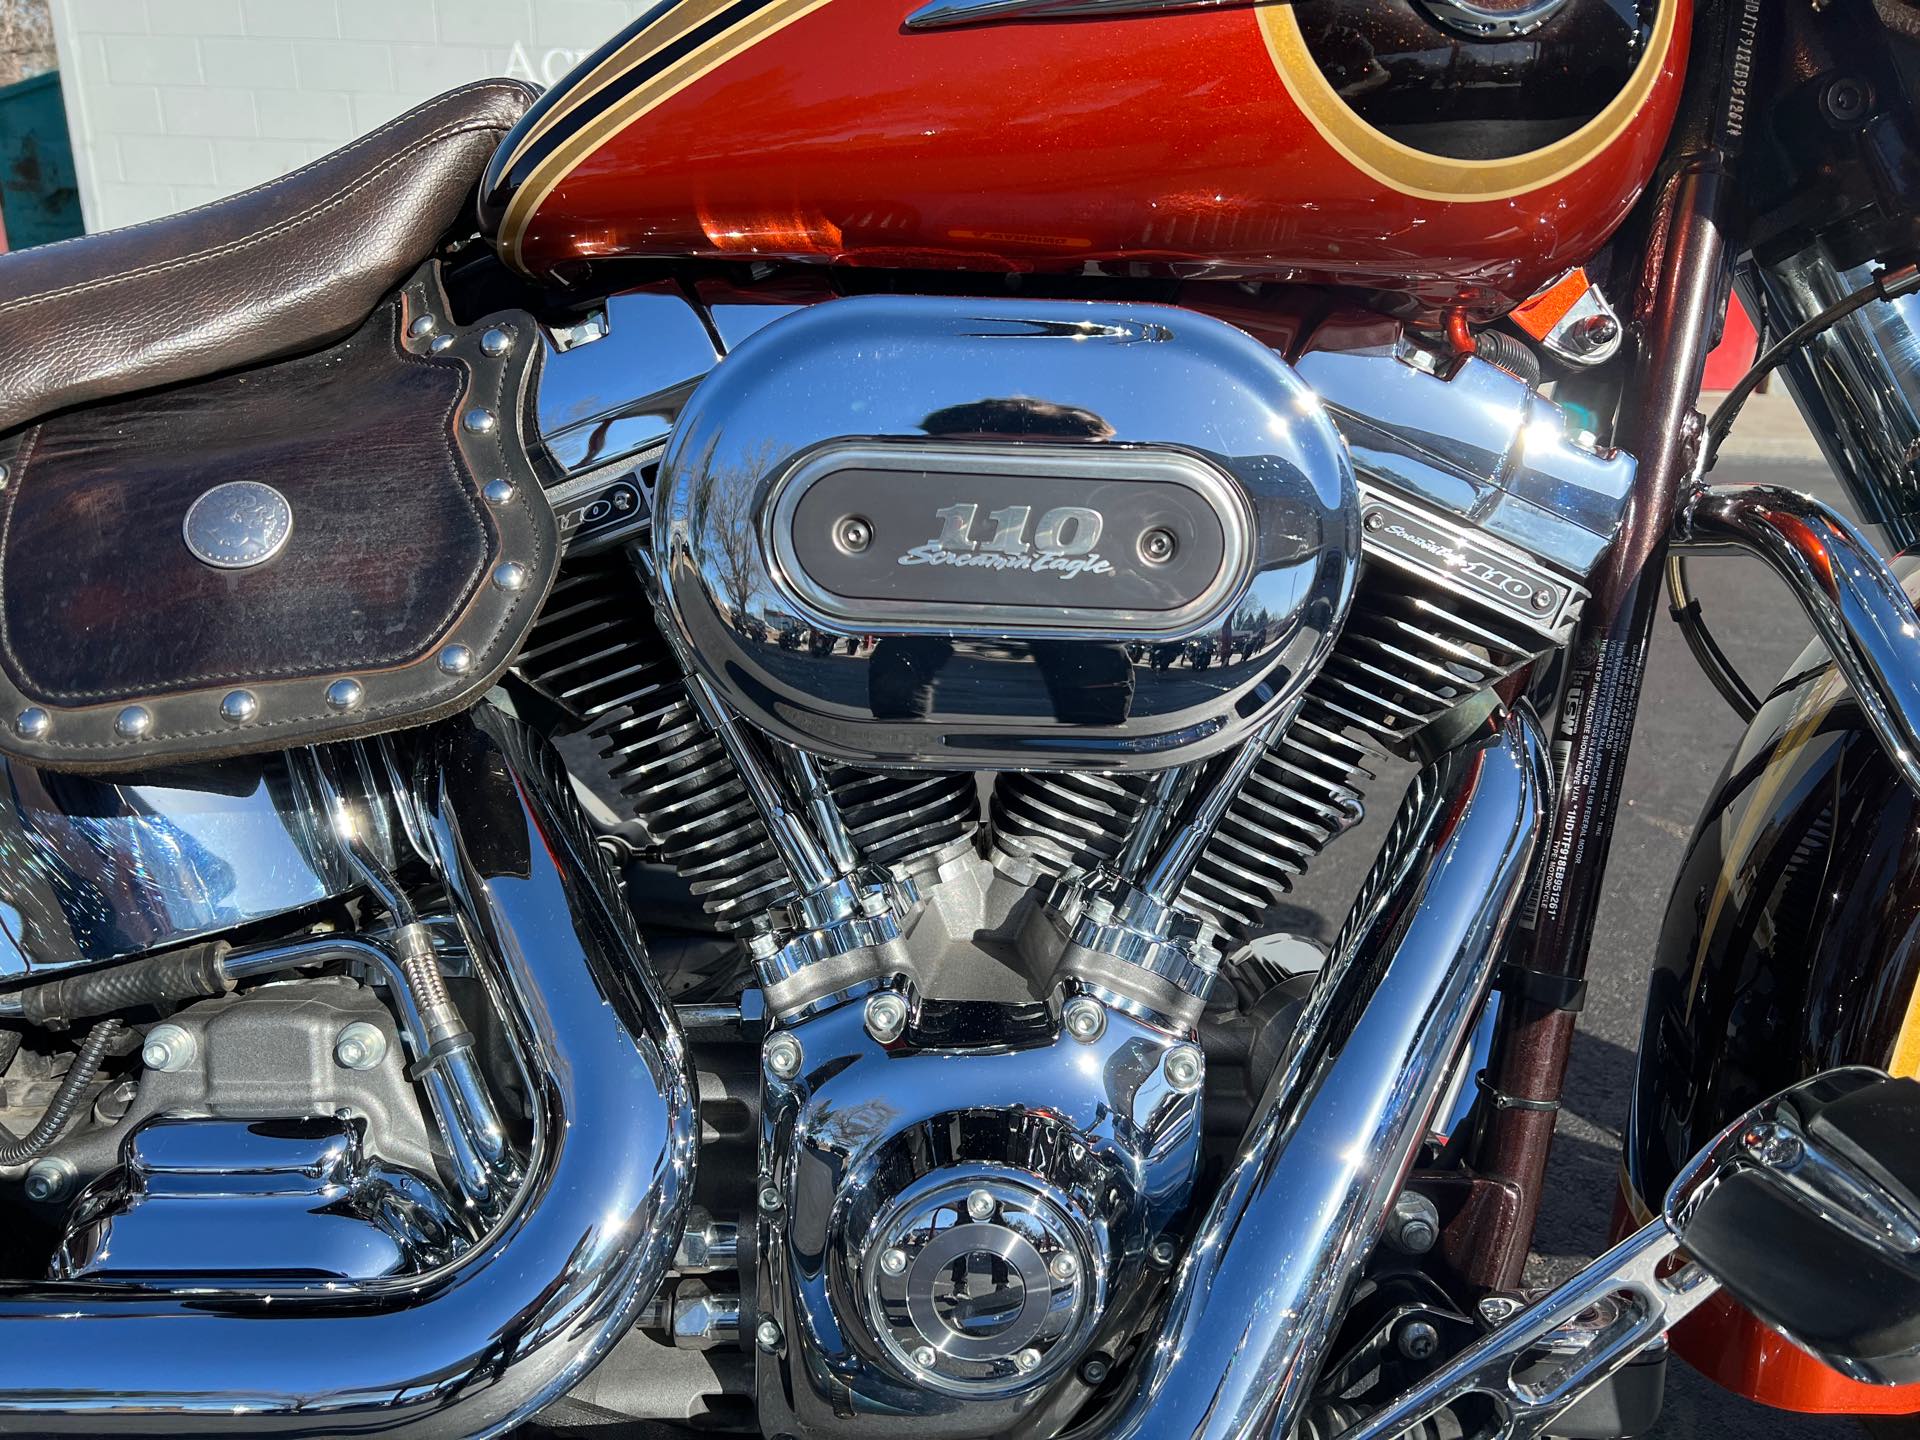 2014 Harley-Davidson Softail CVO Deluxe at Aces Motorcycles - Fort Collins